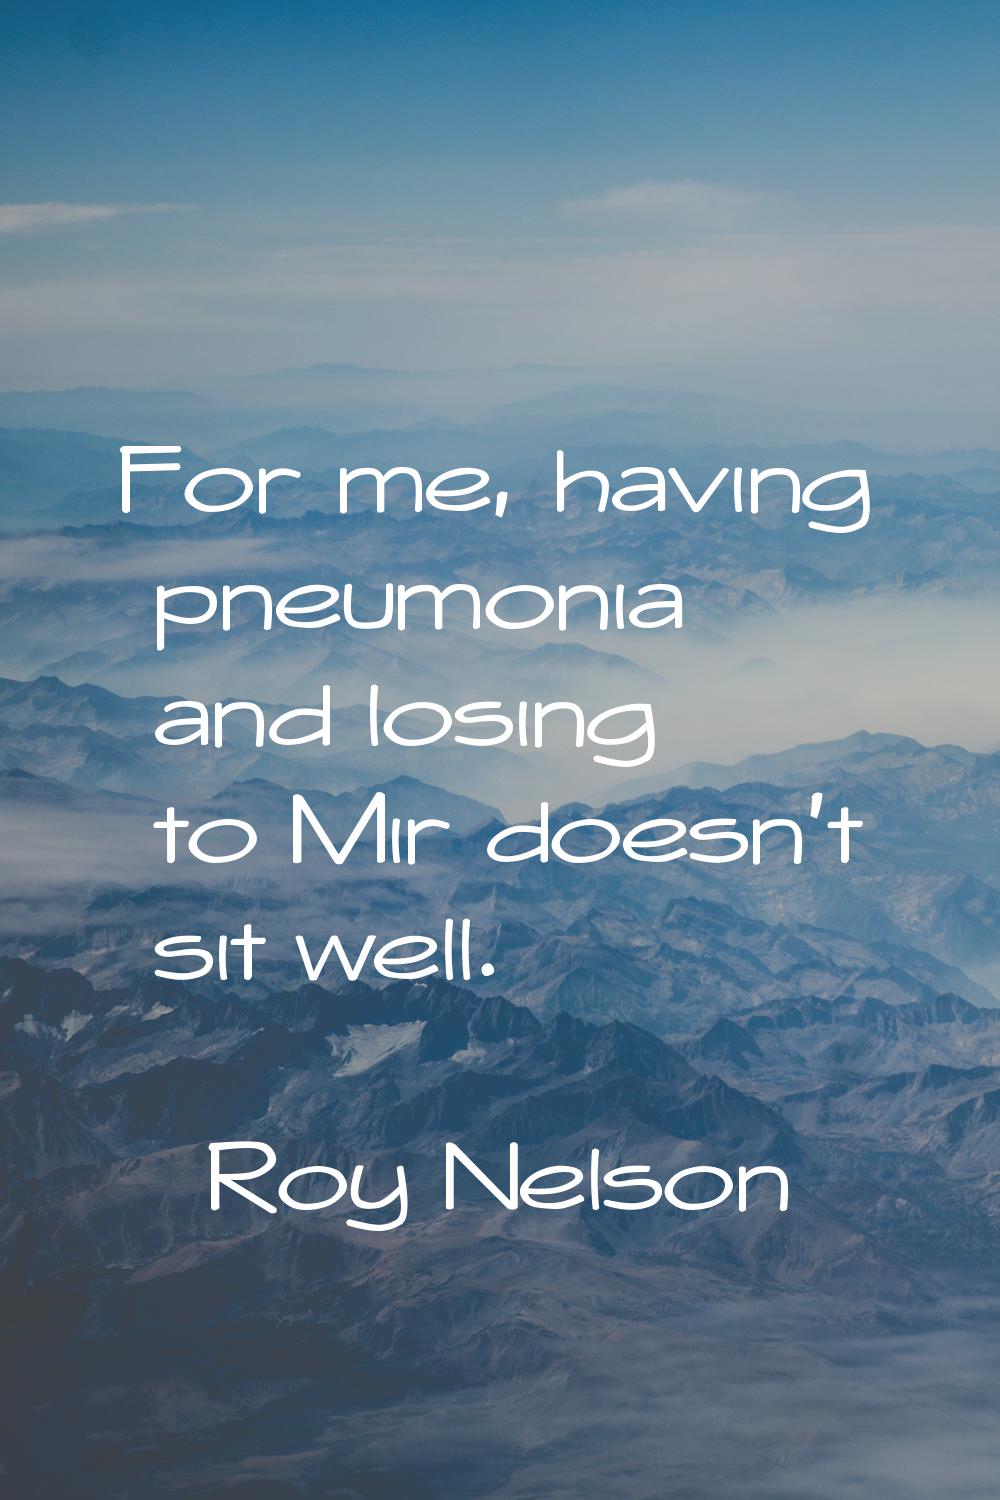 For me, having pneumonia and losing to Mir doesn't sit well.